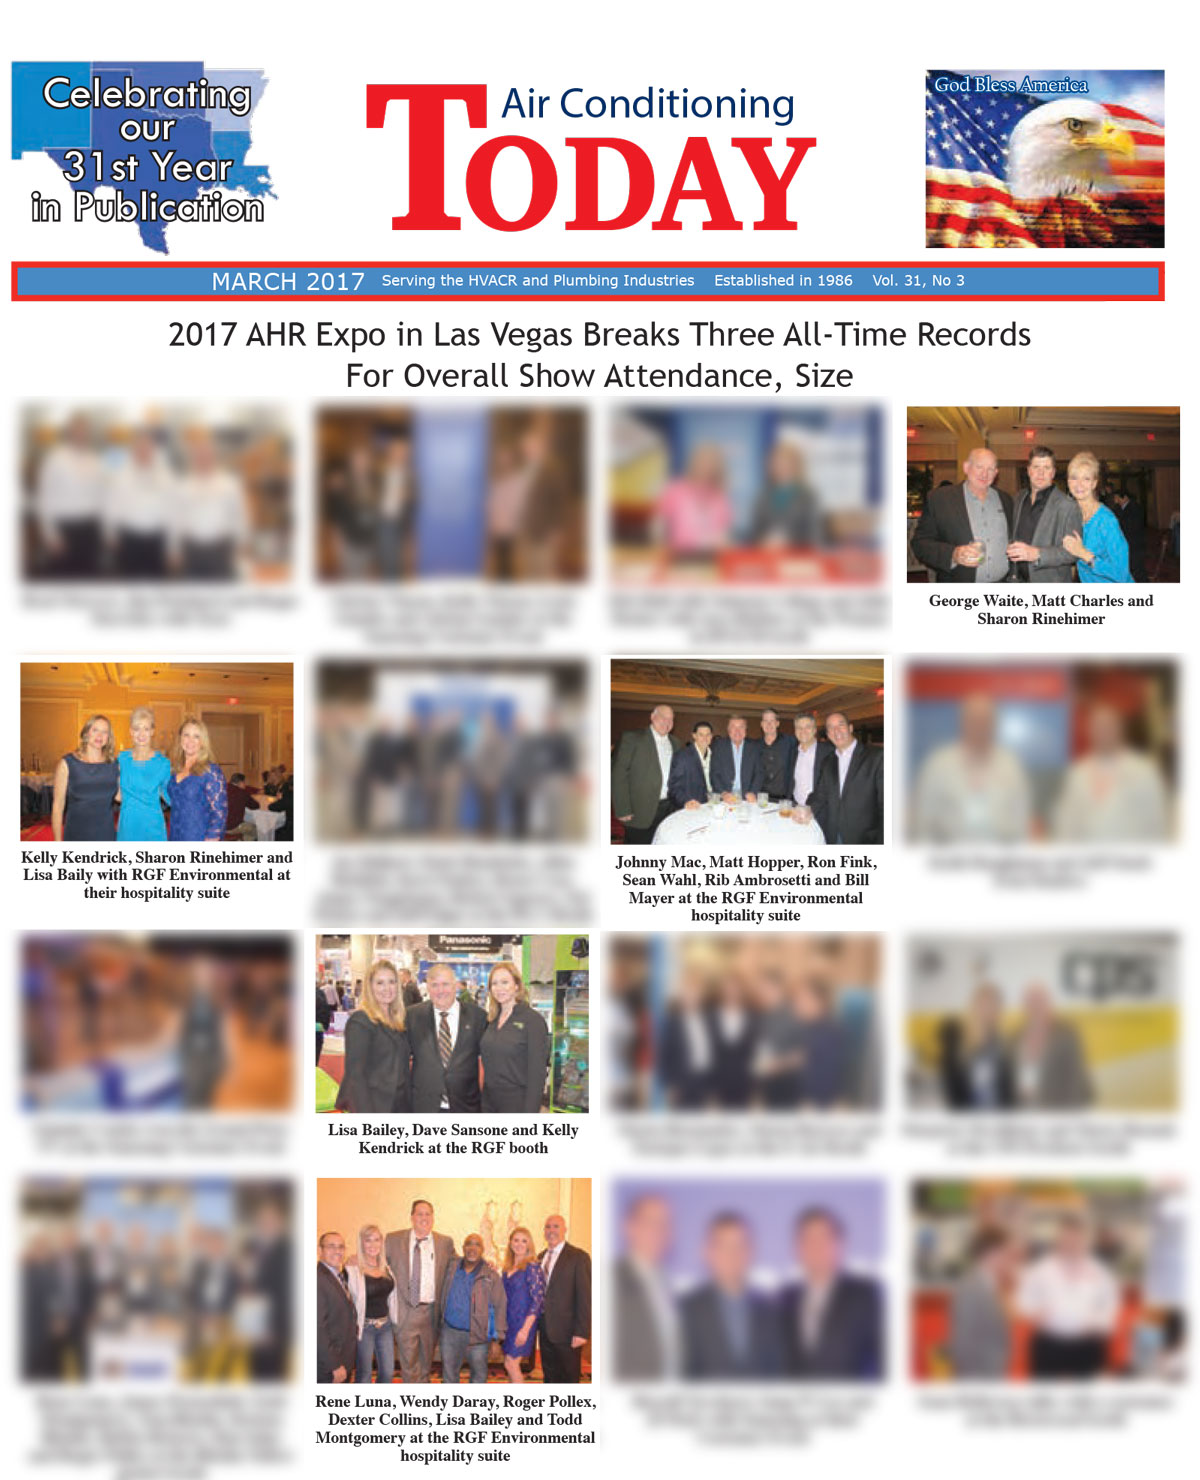 Air Conditioning Today, March 2017 - AHR Expo